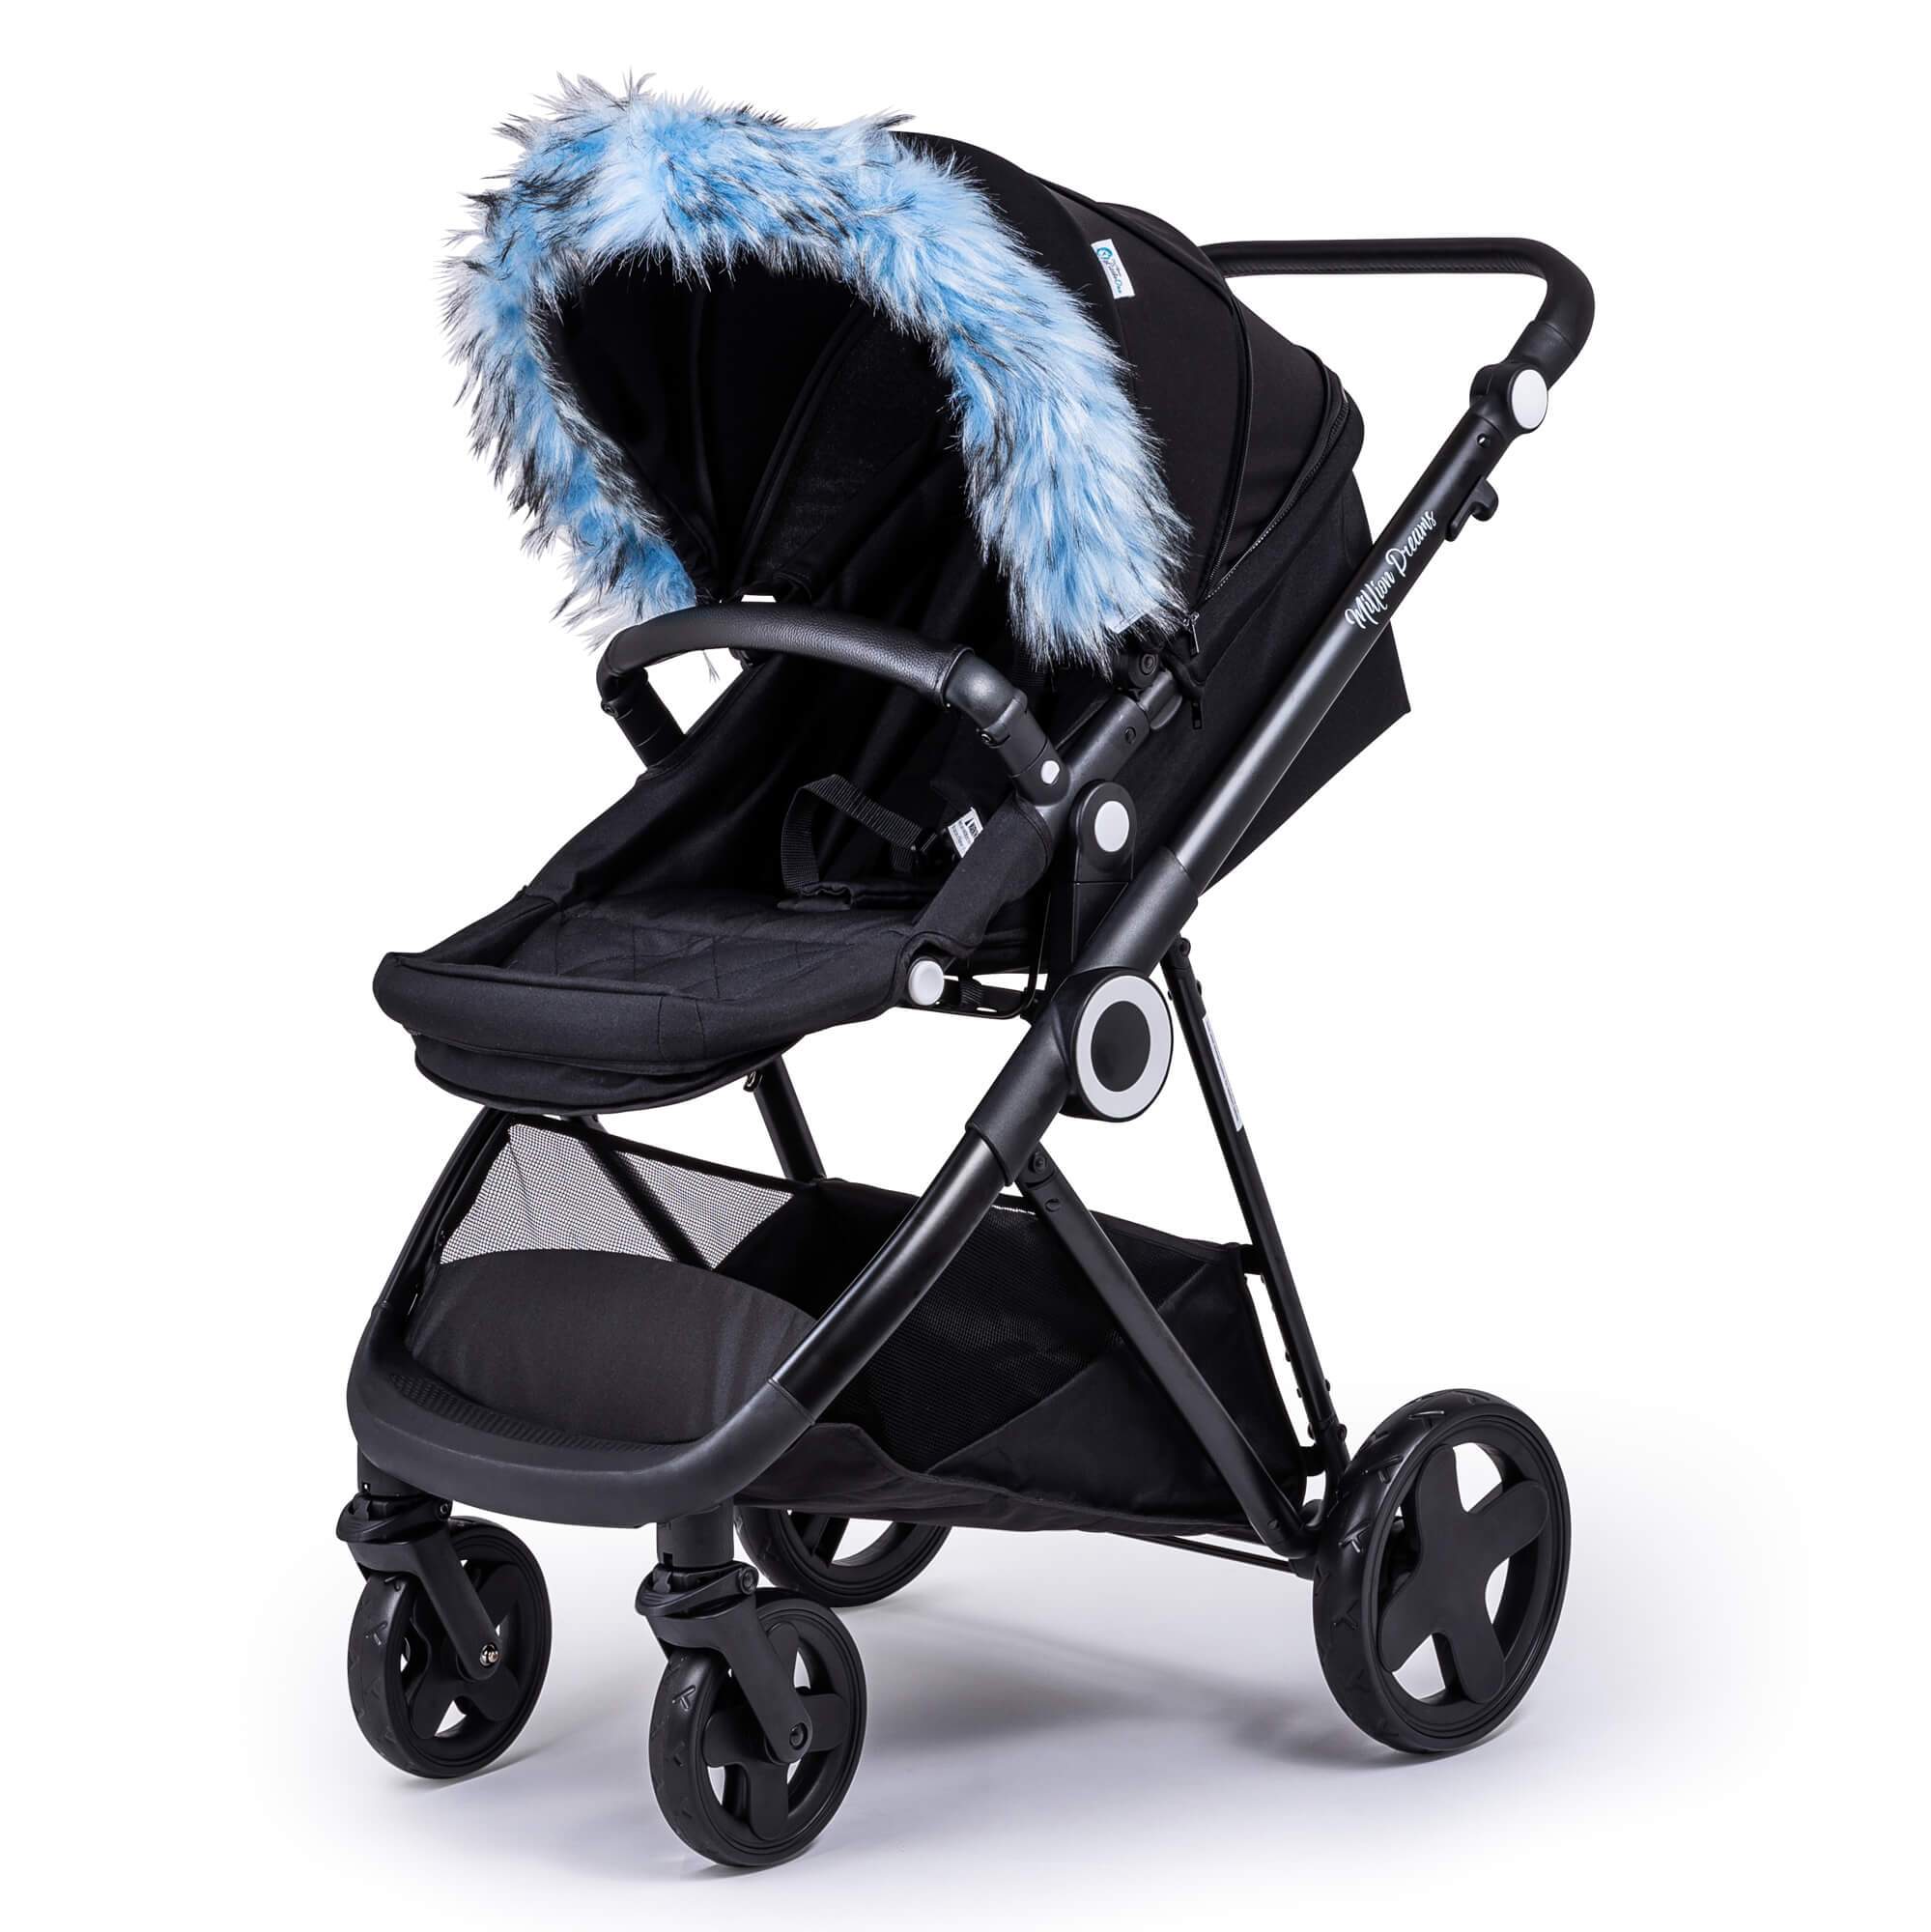 Pram Fur Hood Trim Attachment for Pushchair Compatible with Hybrid - Light Blue / Fits All Models | For Your Little One